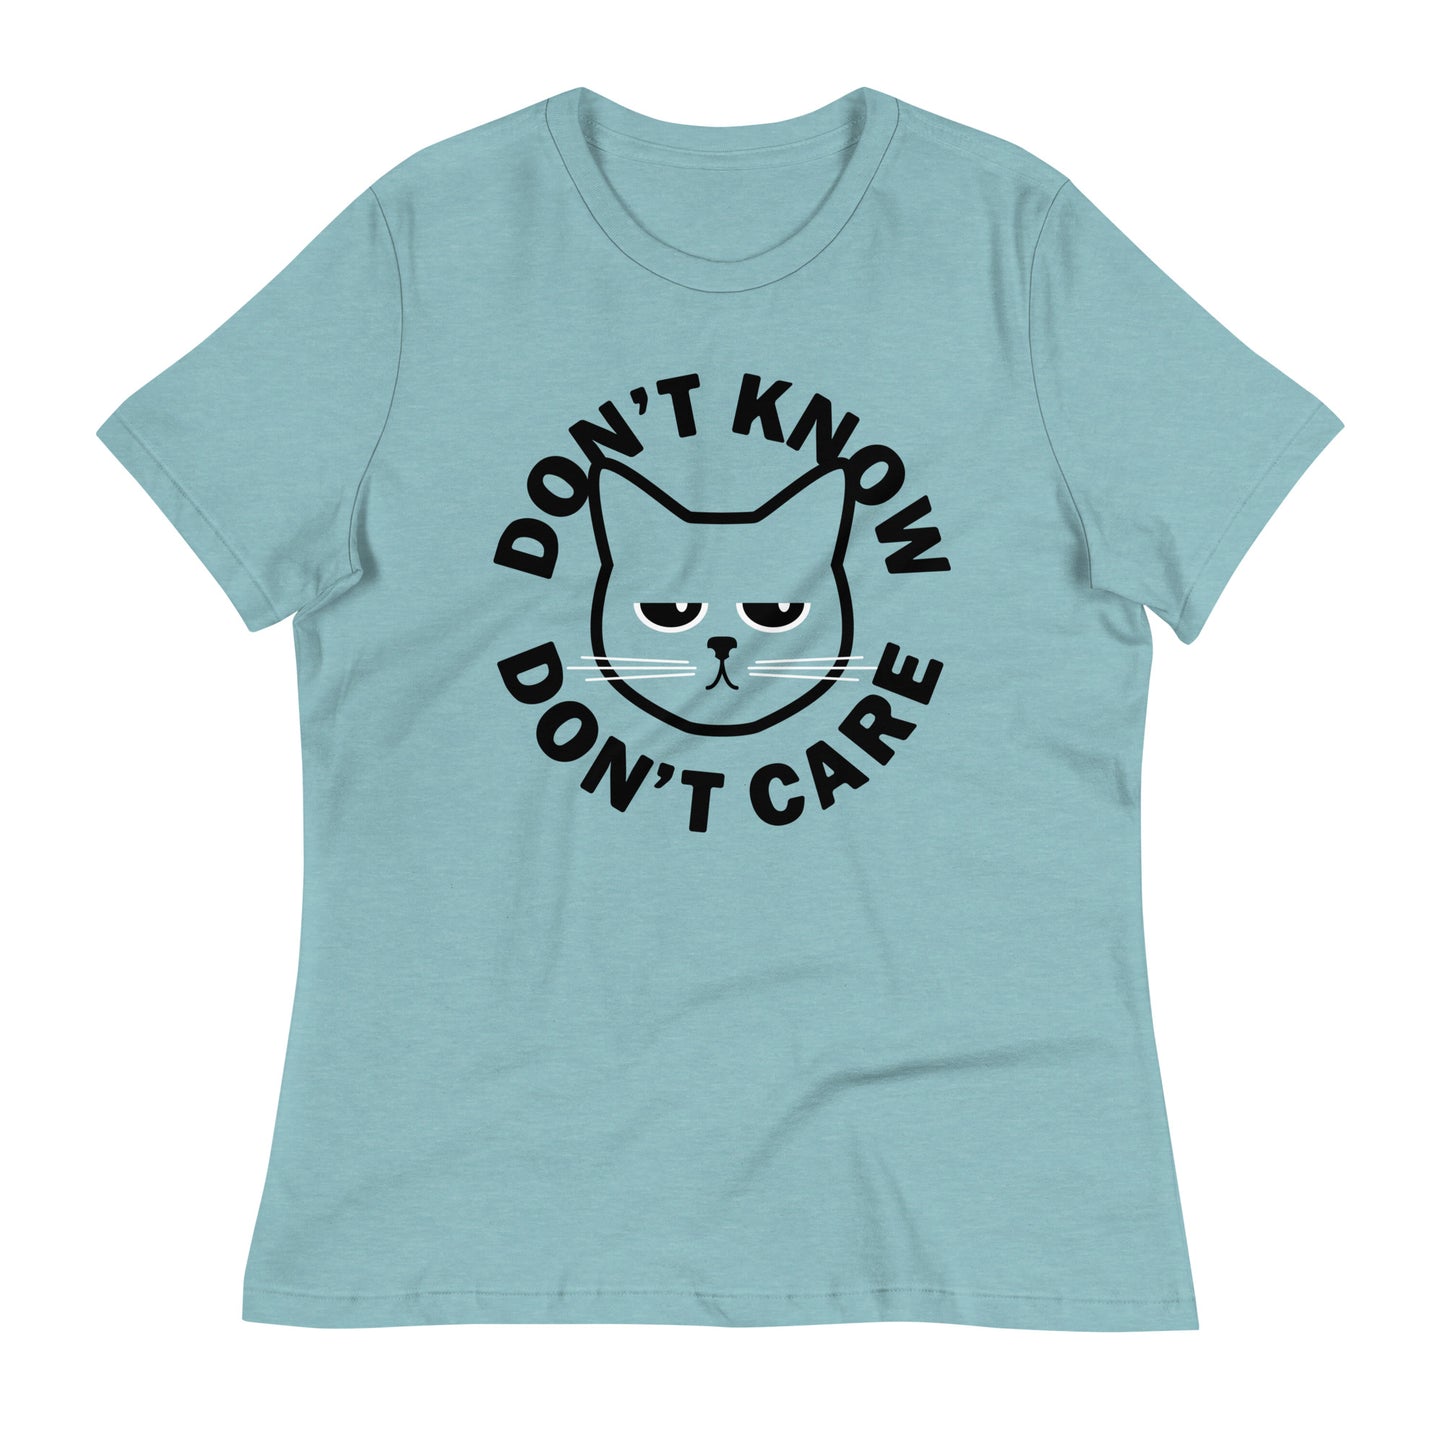 Don't Know Don't Care Women's Signature Tee